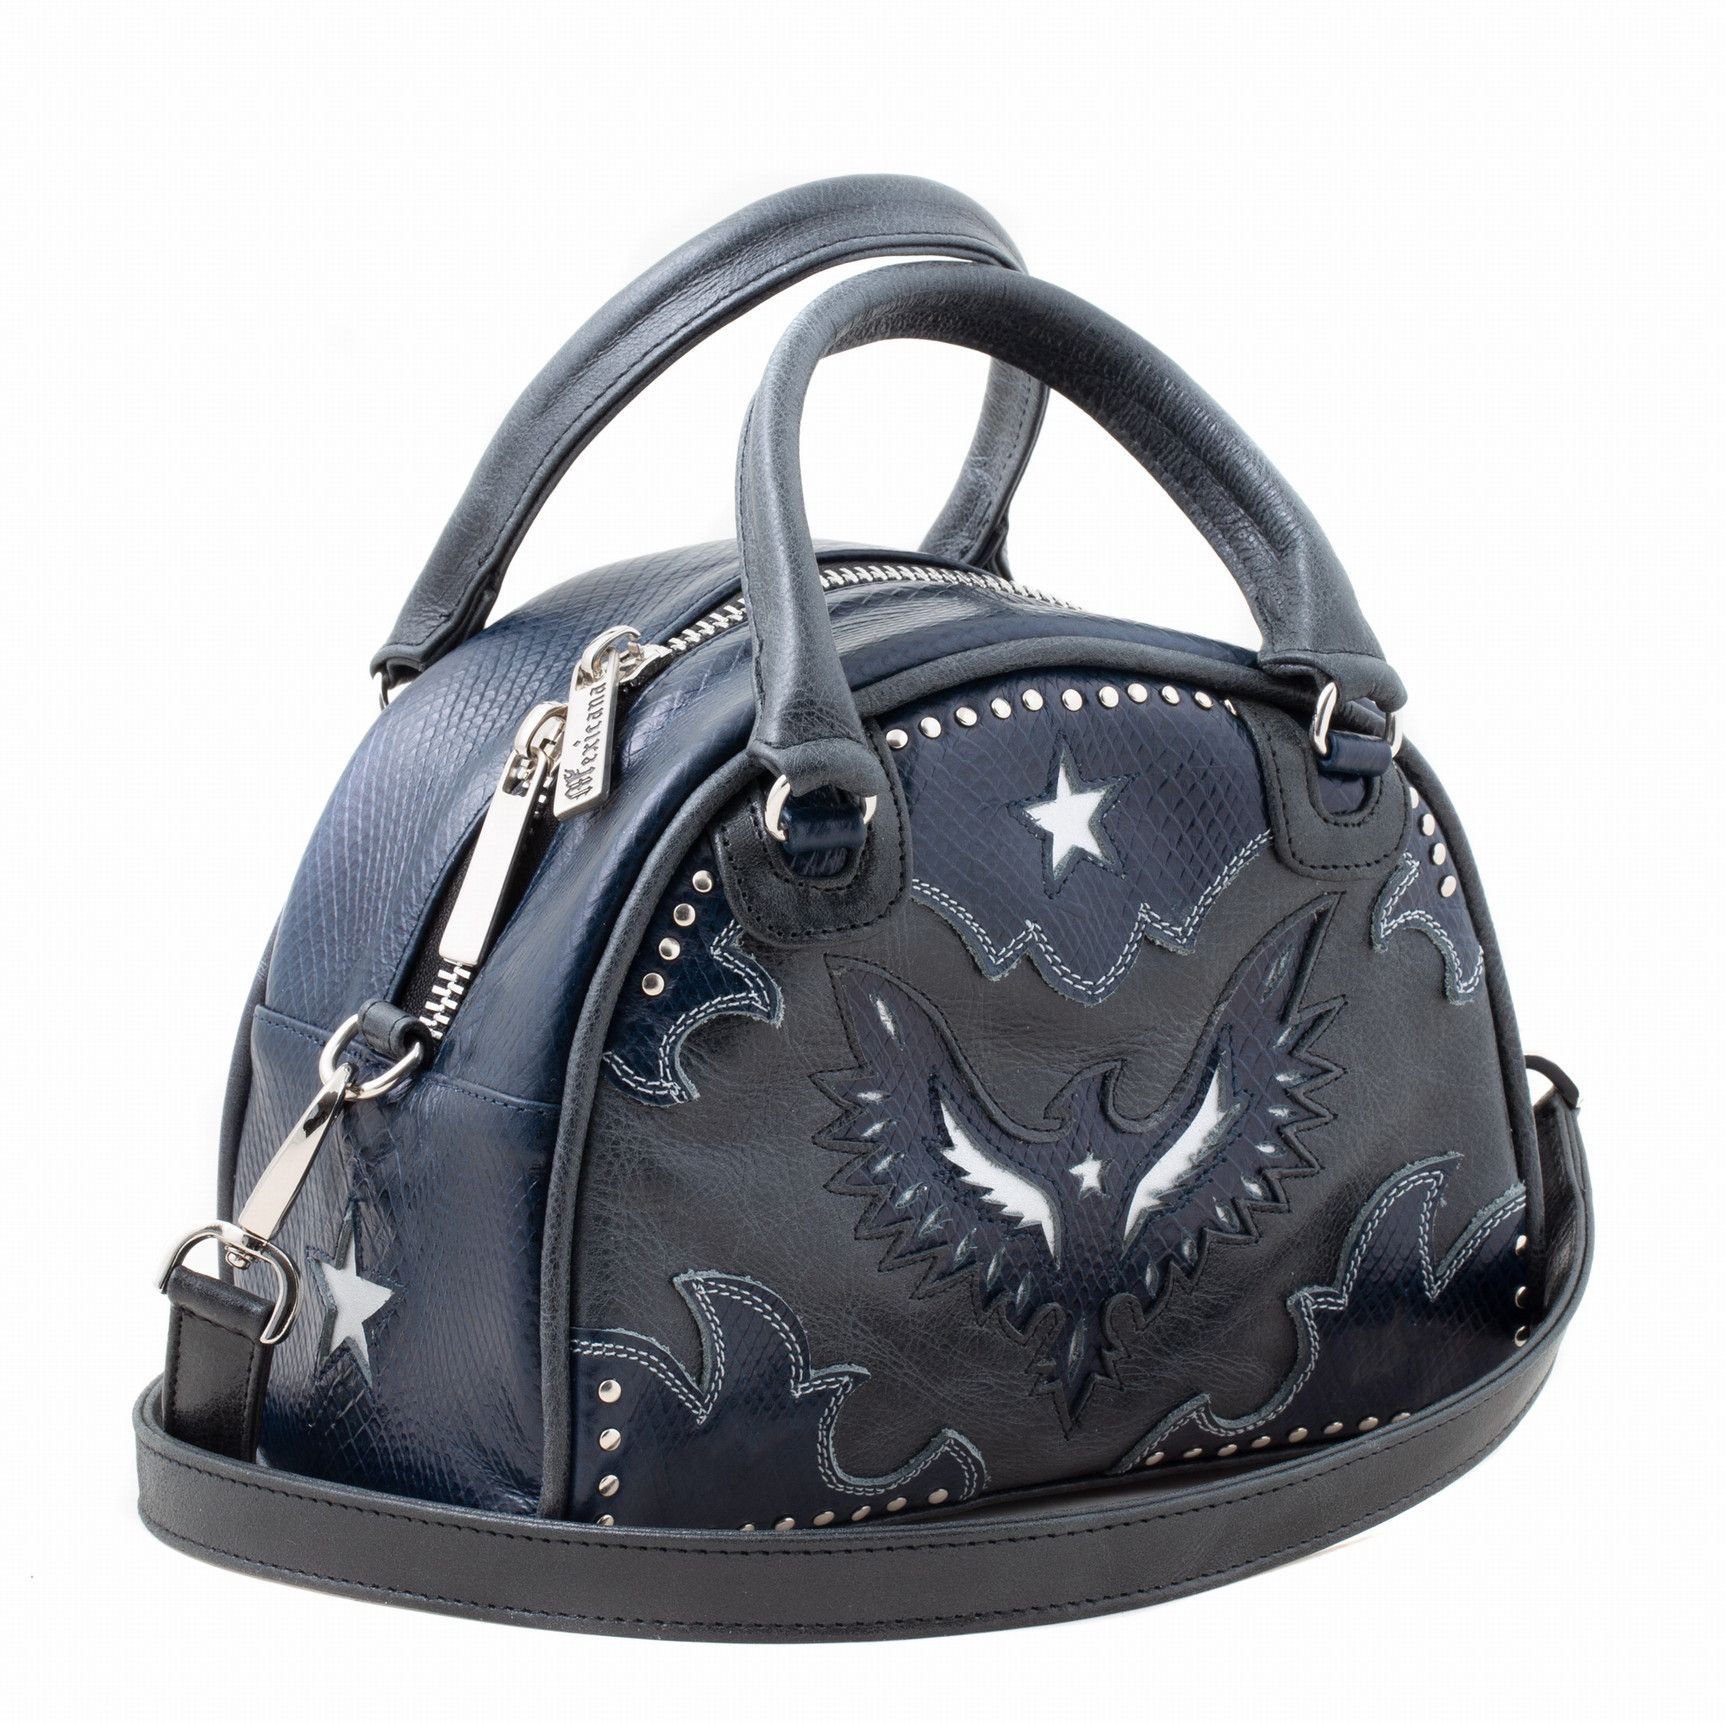 BOWLING BAG BLACK BLUE WHITE MINI BOWLING BAG WITH LEATHER INLAY AND STUDS  Mix color black / blue / white  Cowhide leather  Lea